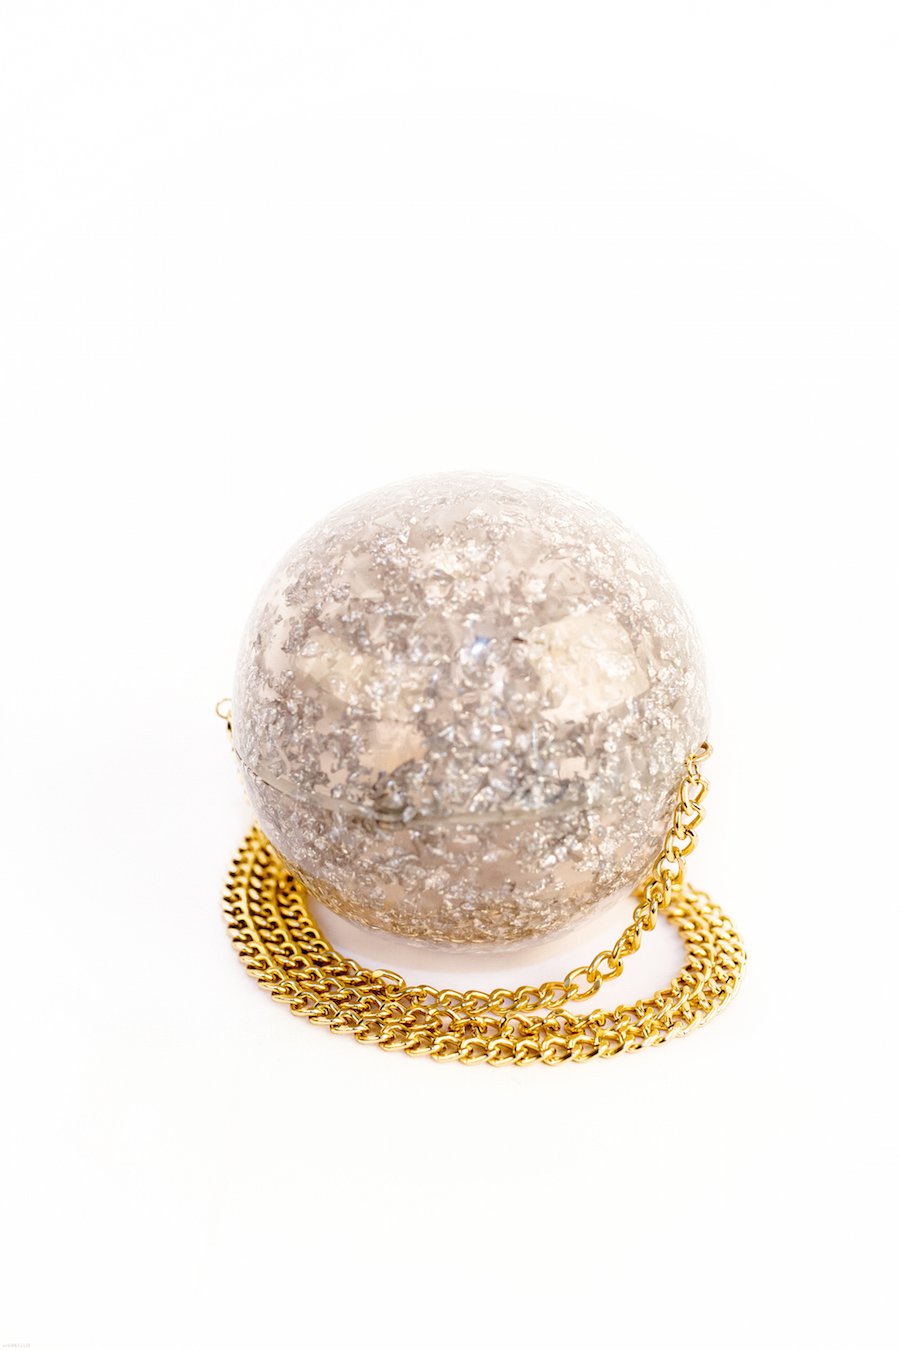 Image of The Sphere Clutch